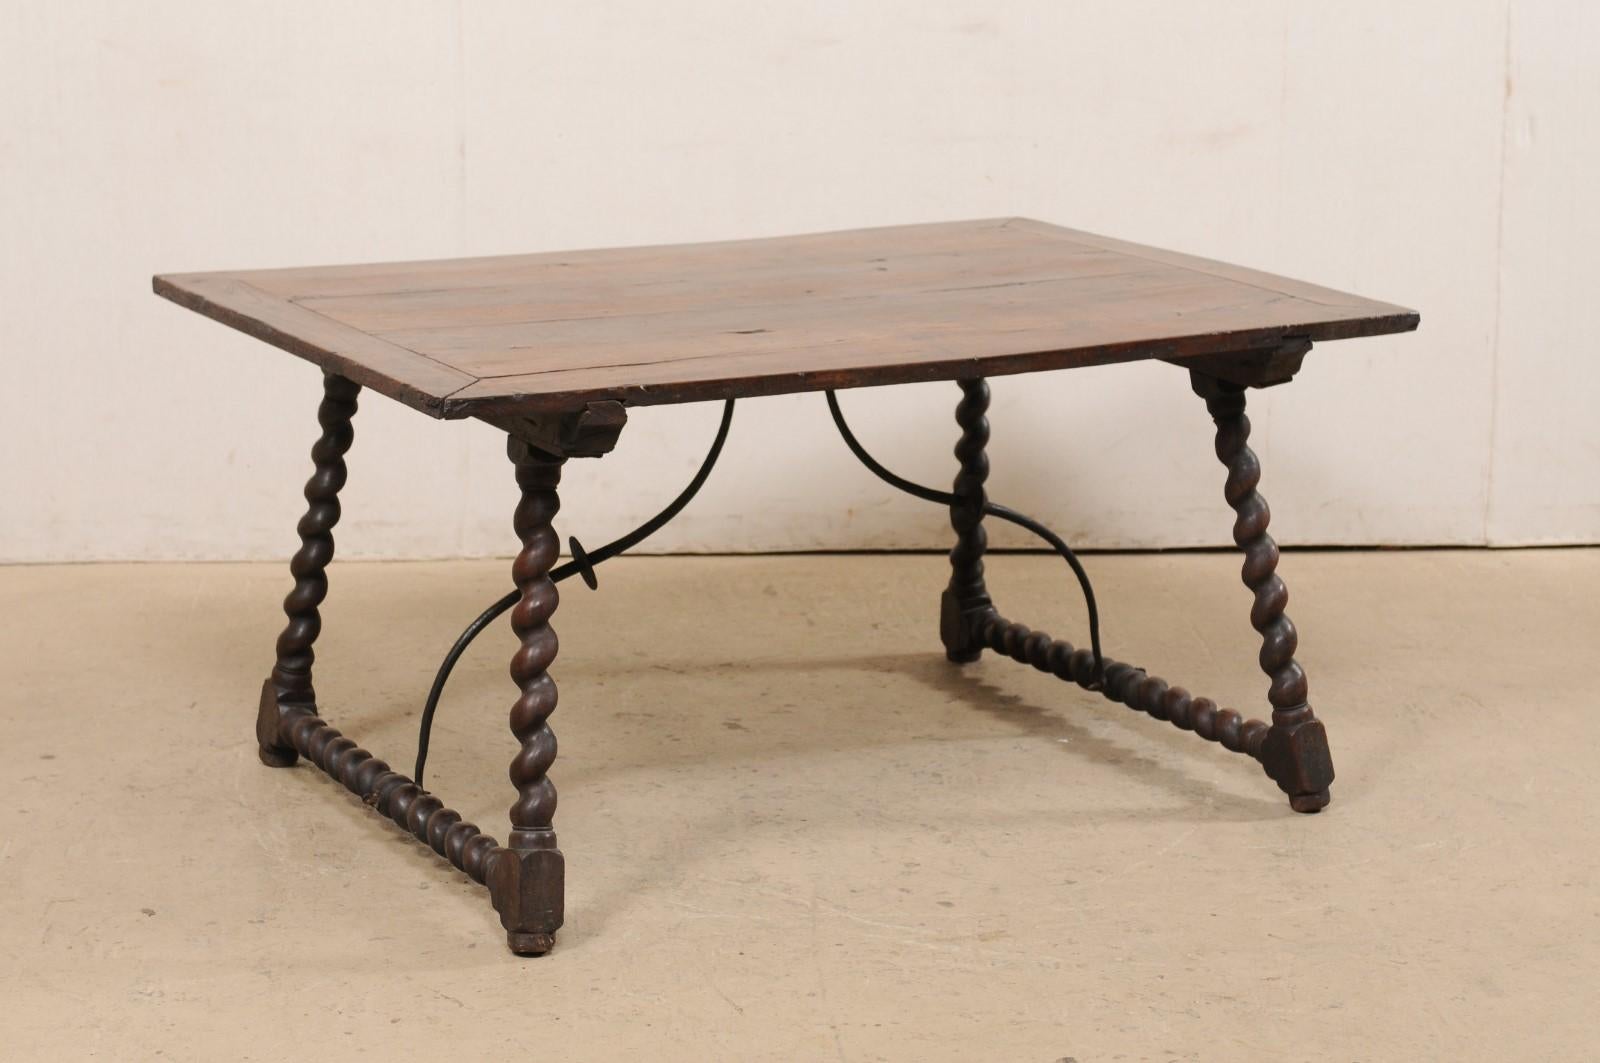 Wood Early 18th C. Italian Table w/Forged Iron Stretcher and Barely-Twist Legs For Sale